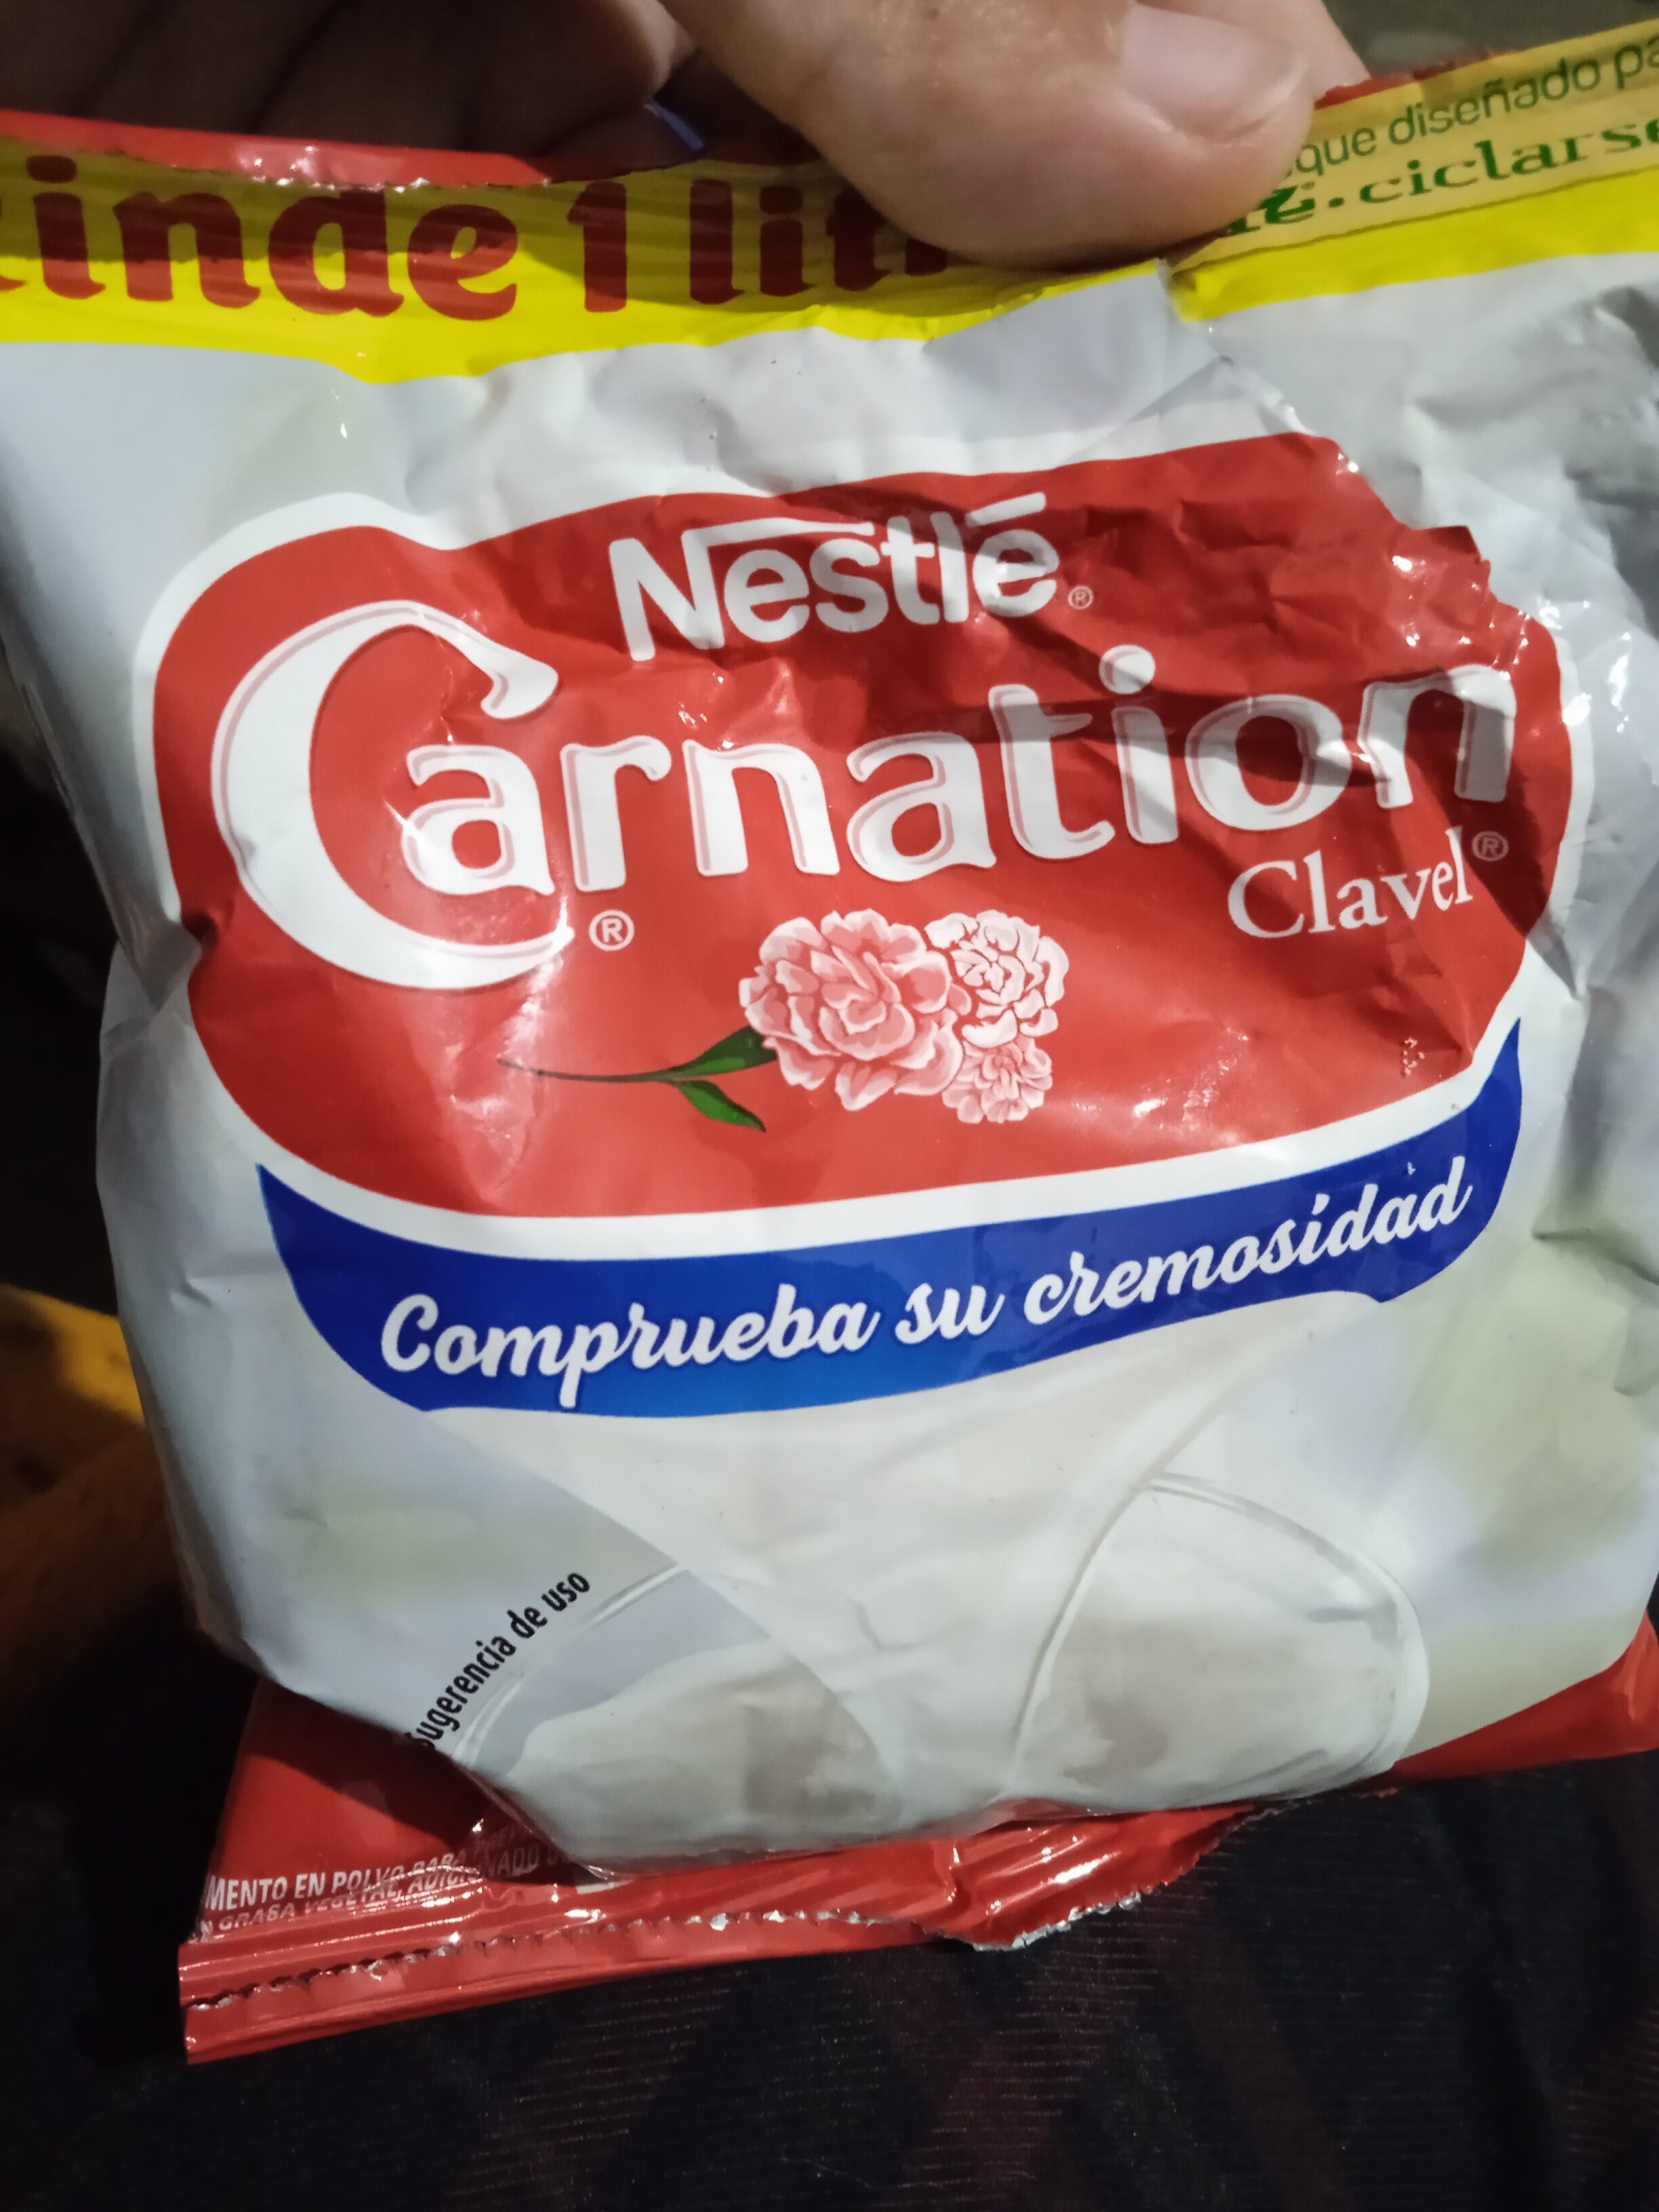 carnation clavel - Producto